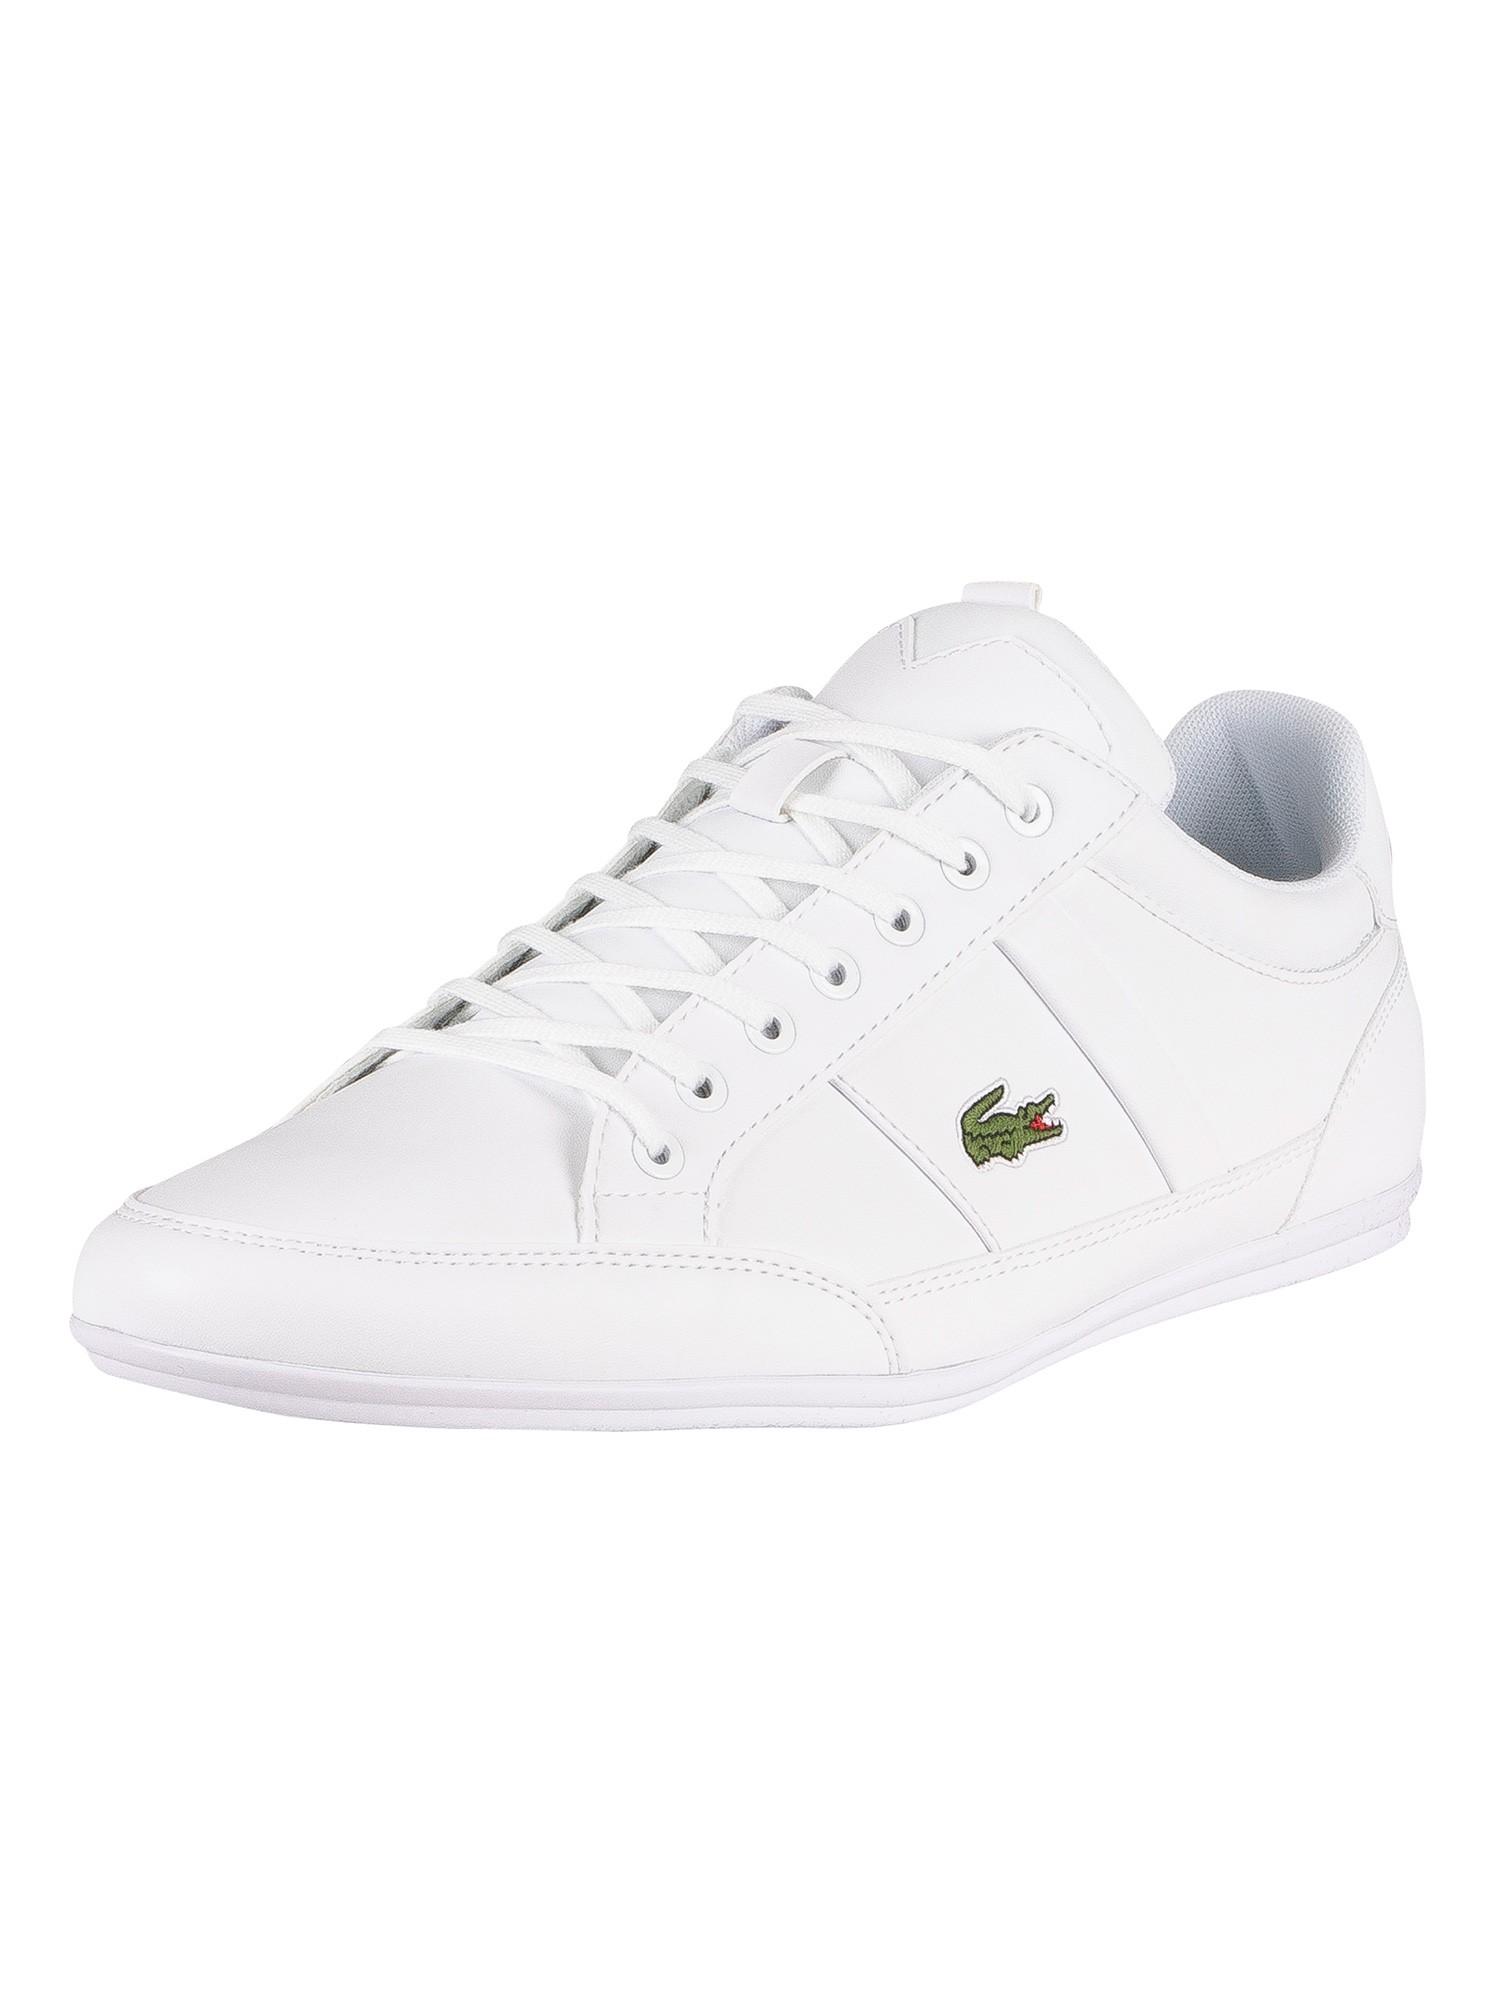 Lacoste Chaymon Bl21 1 Cma Synthetic Leather Trainers in White for Men ...